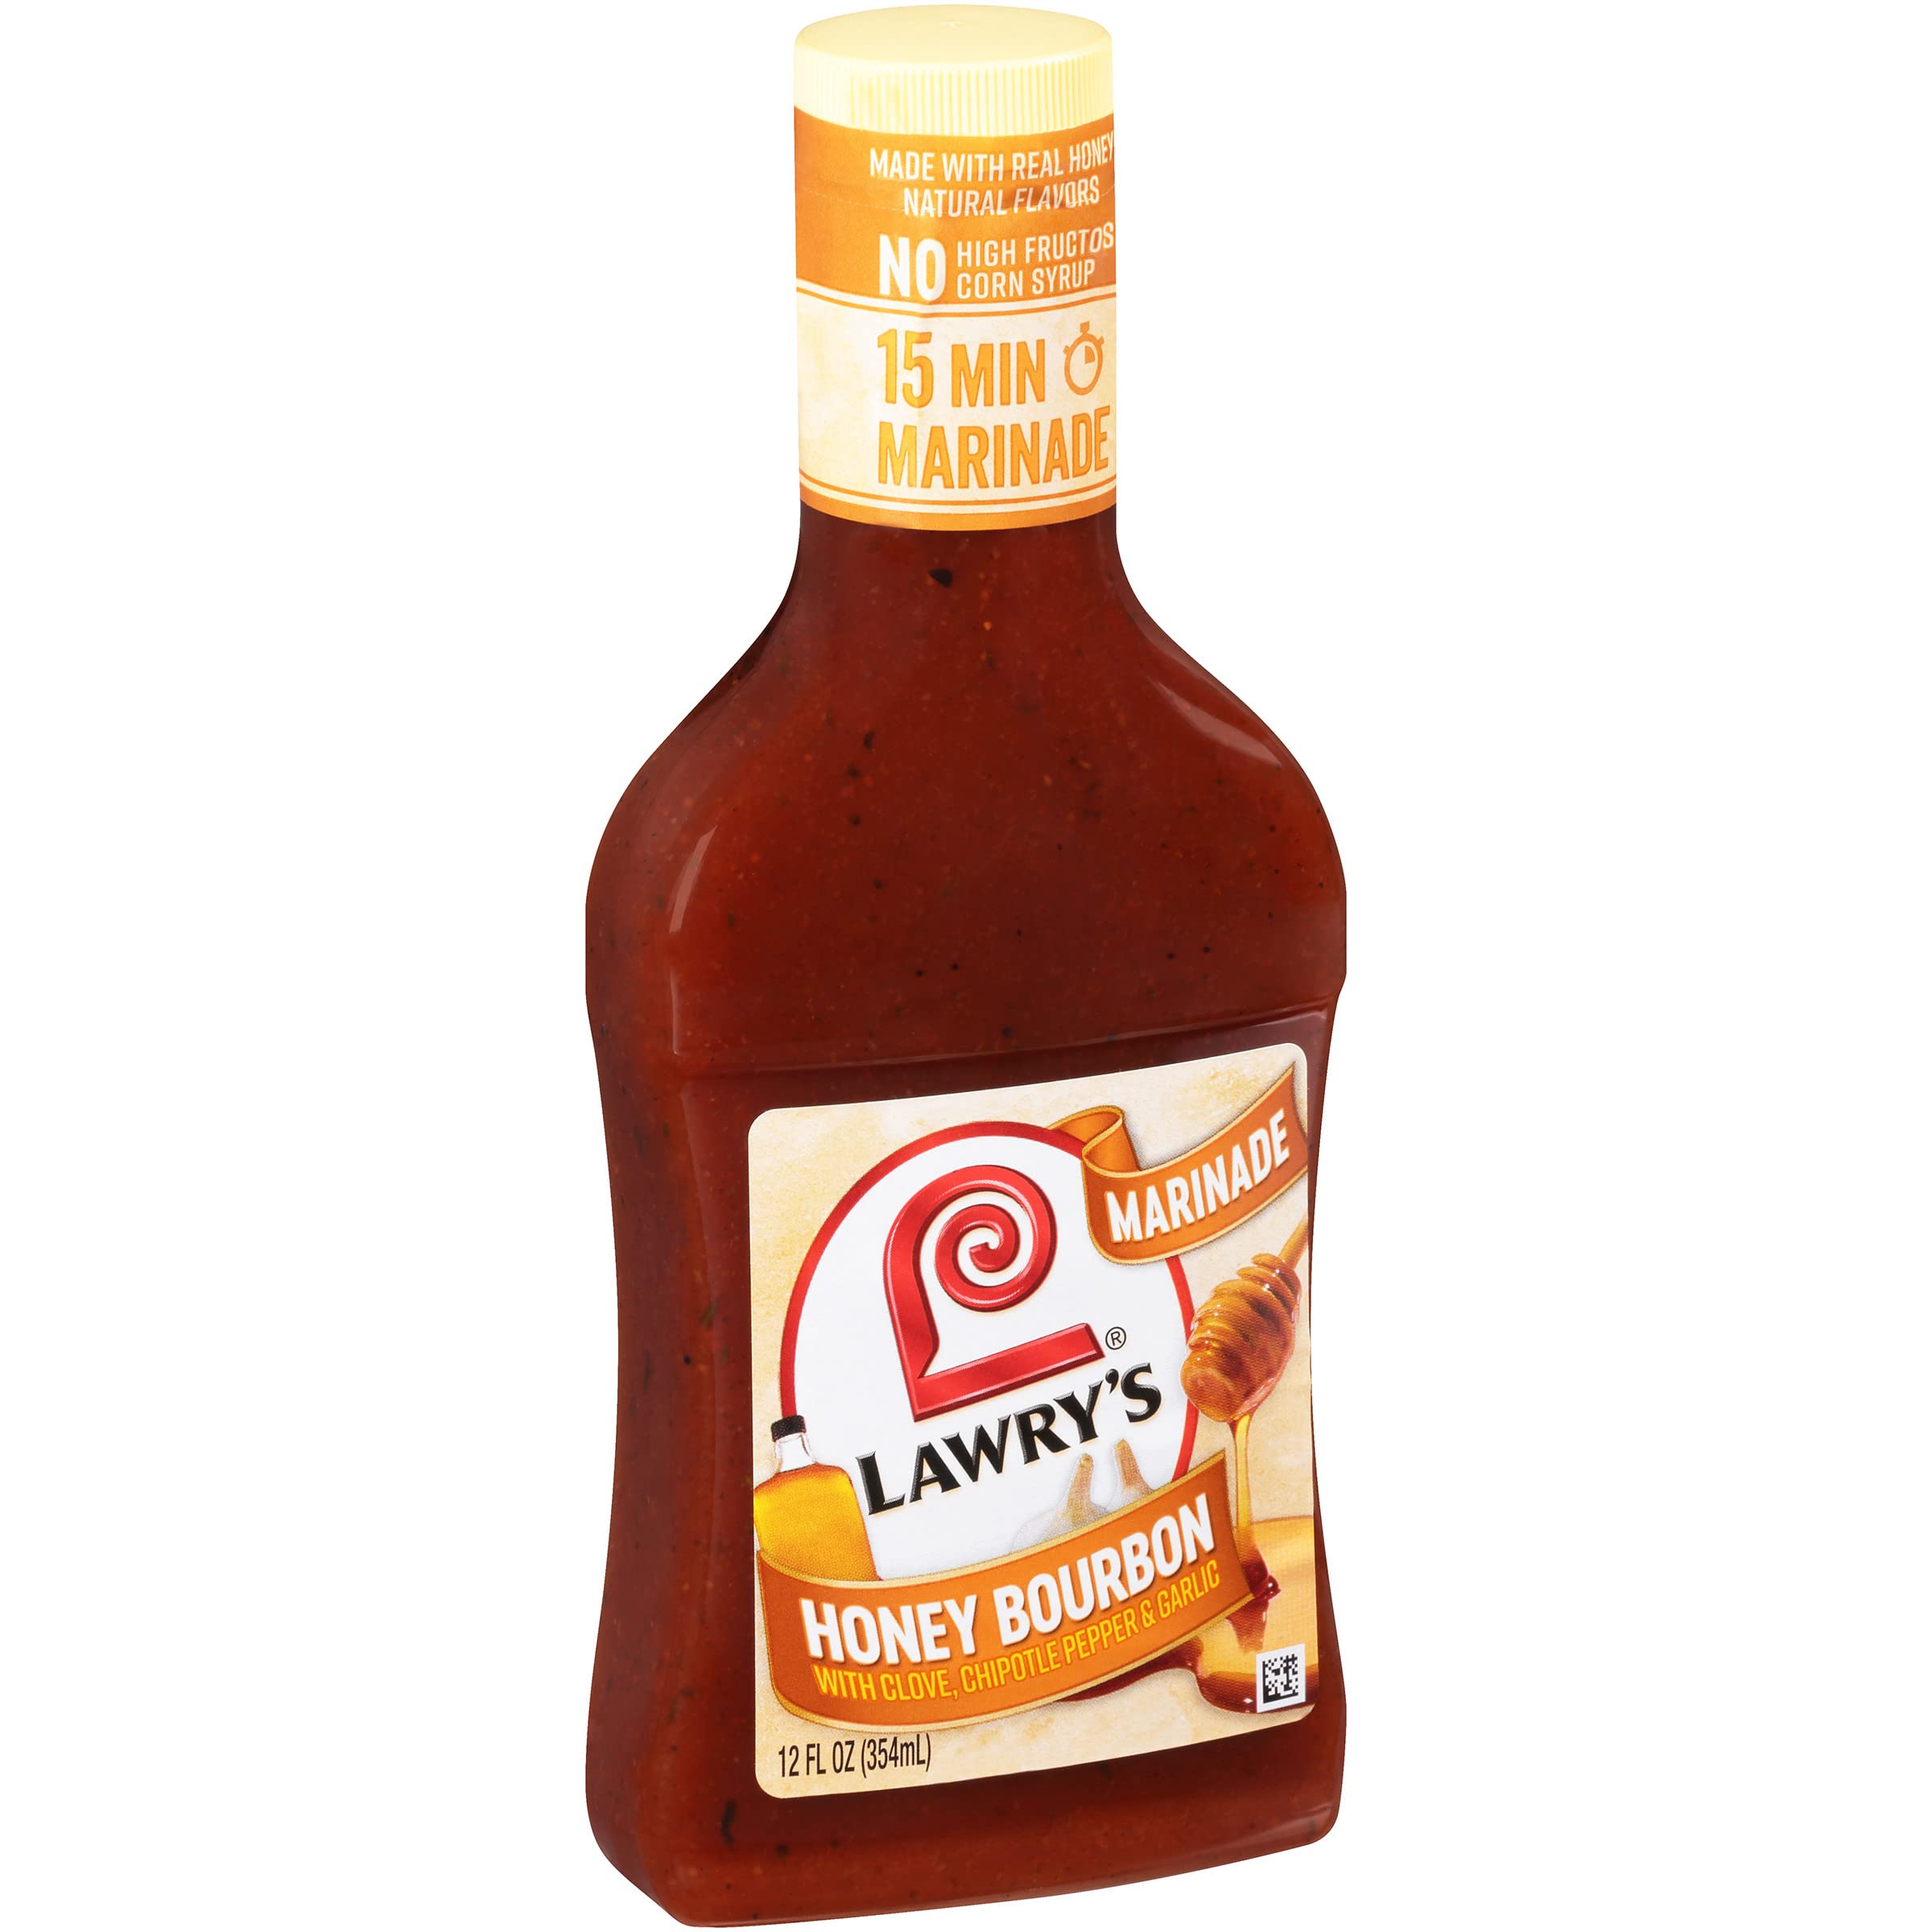 12-Oz Lawry's Honey Bourbon with Clove, Chipotle Pepper & Garlic Marinade 5 for $9.20 ($1.84 each) w/ S&S + Free Shipping w/ Prime or on $35+